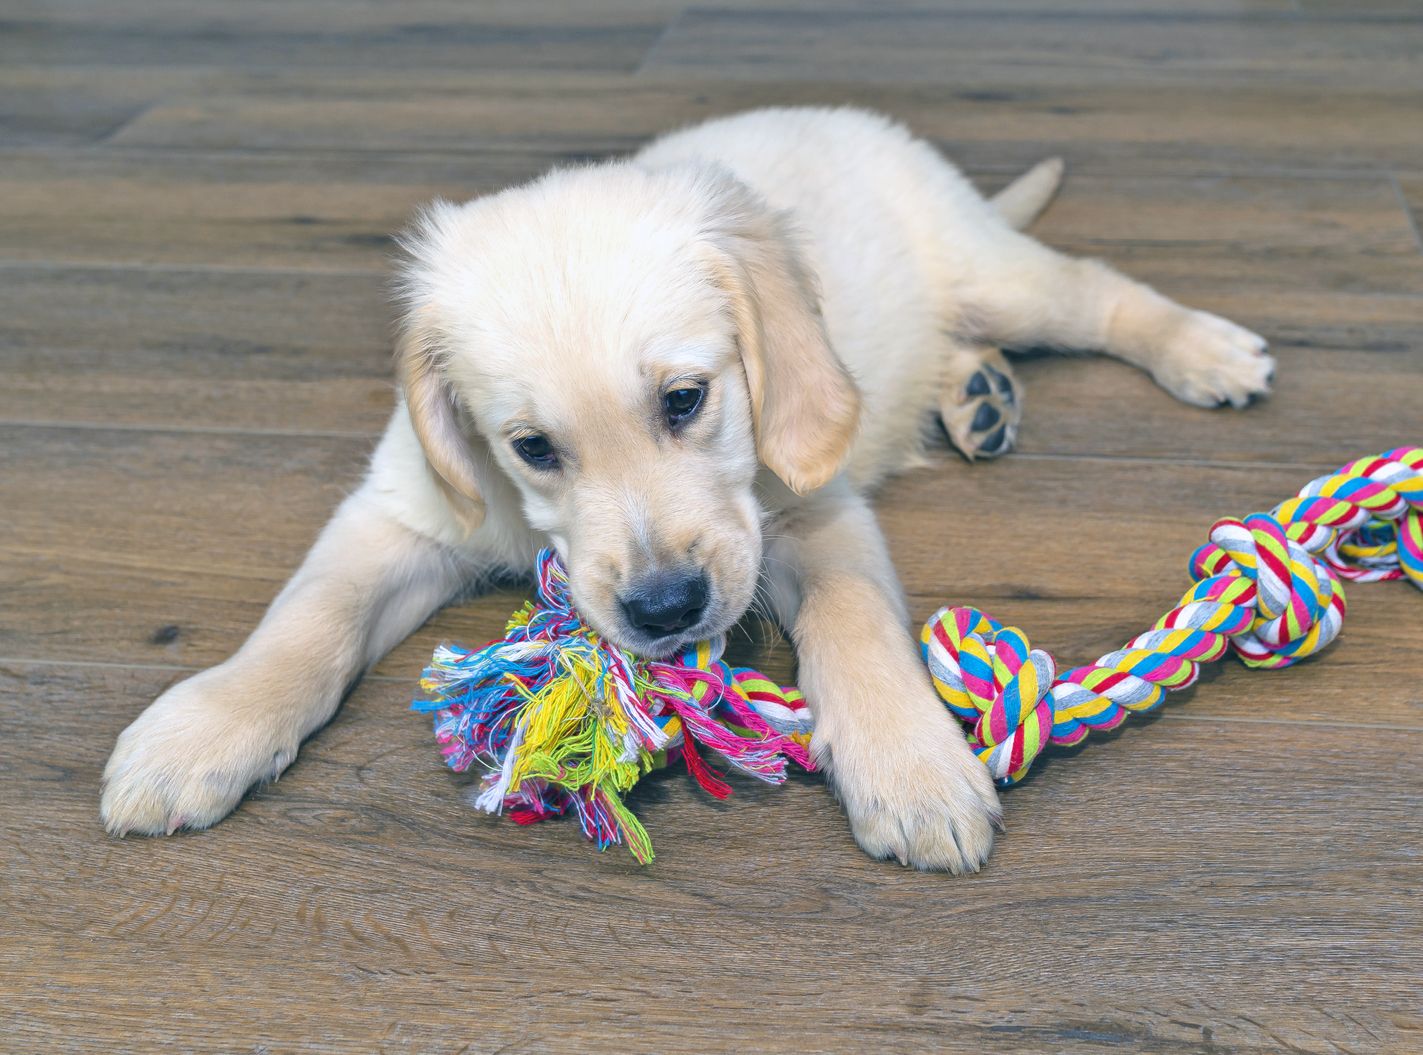 17 Dog Toys That Reviewers and Their Dogs Love